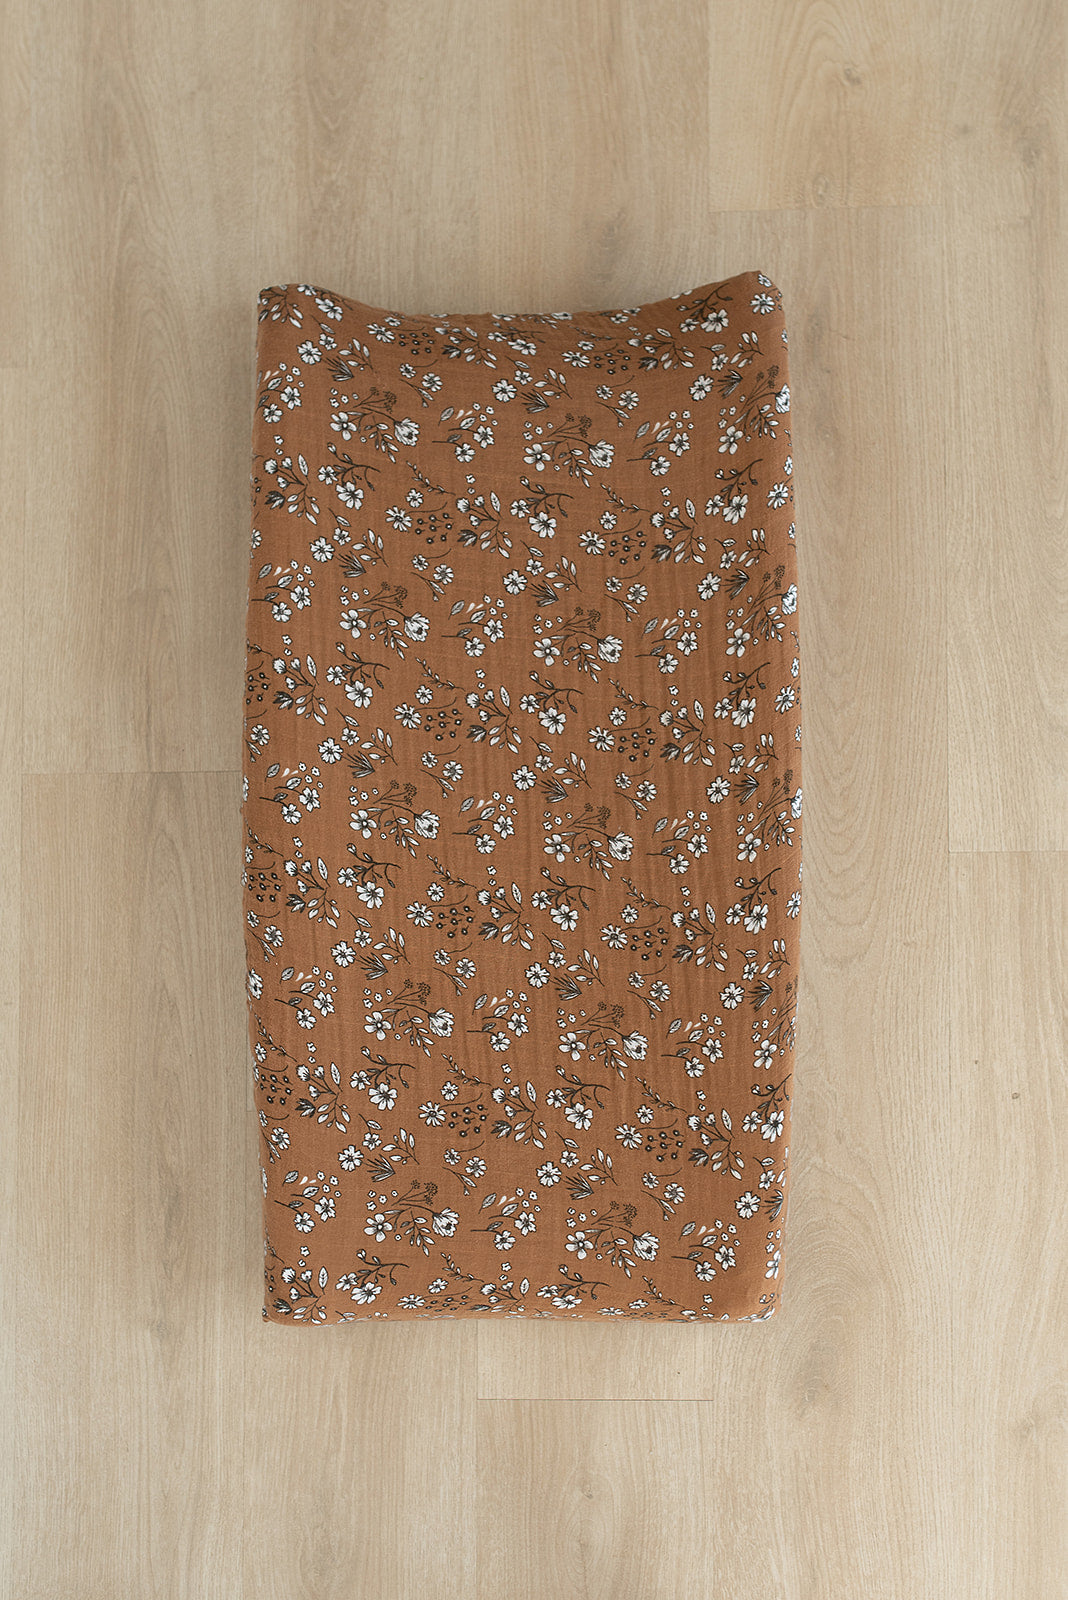 Vintage Floral Muslin Changing Pad Cover